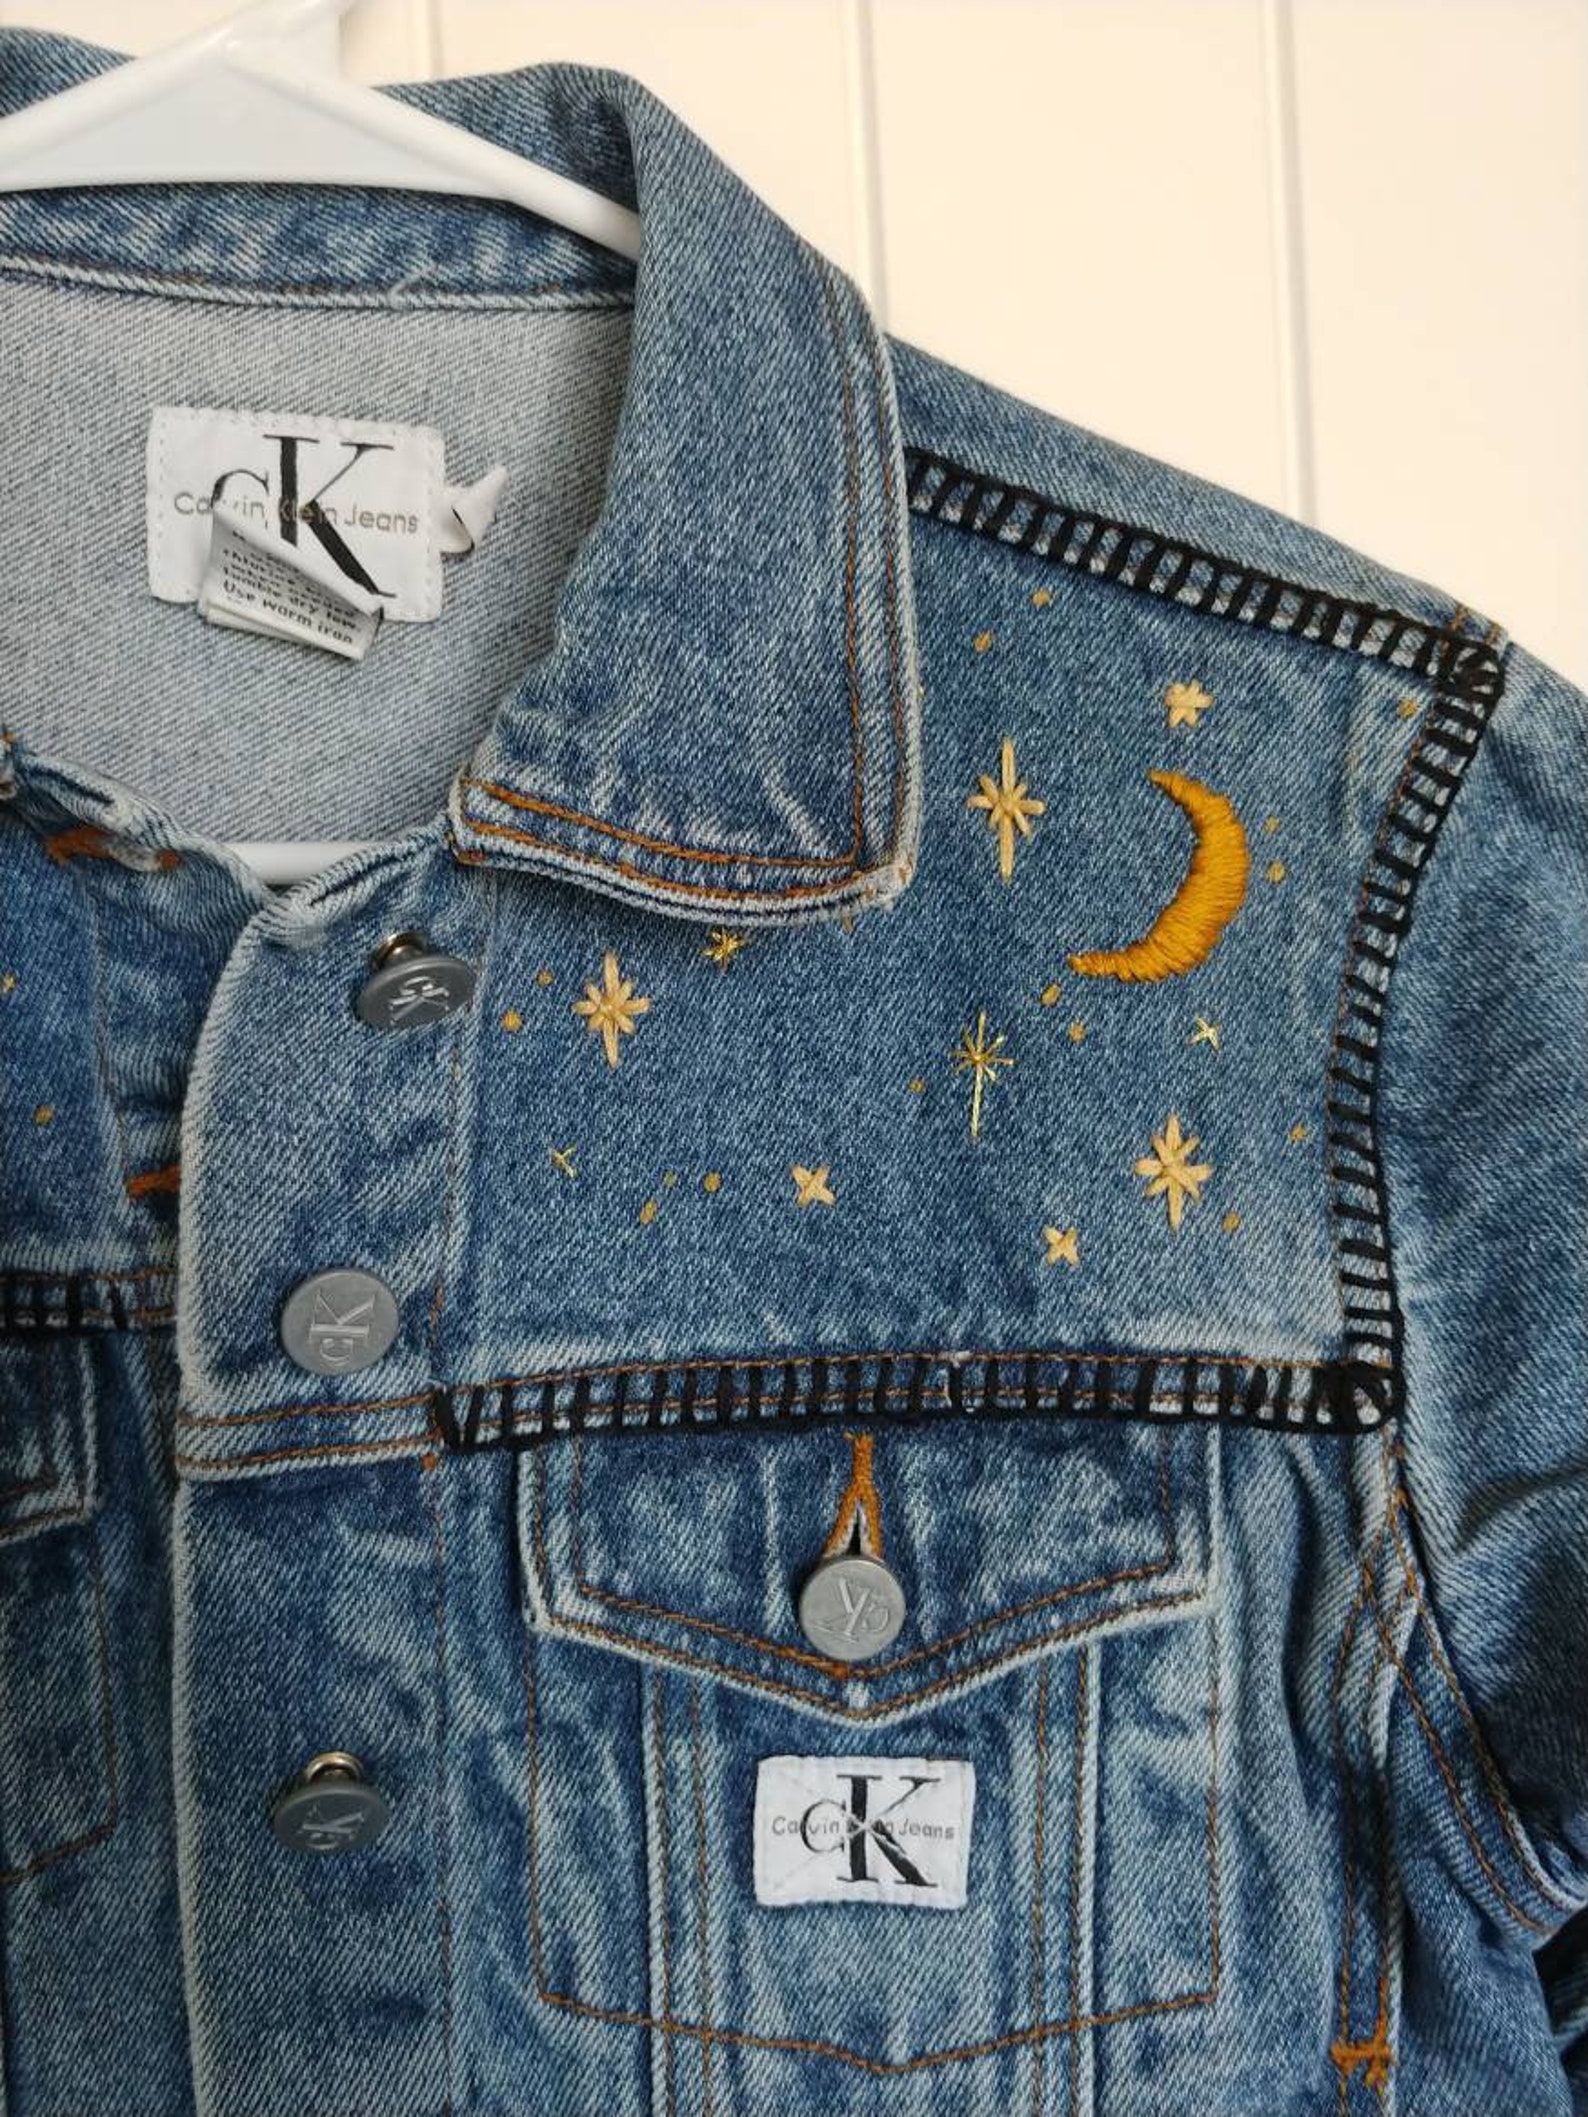 Hand painted and embroidered vintage denim jacket one of a | Etsy